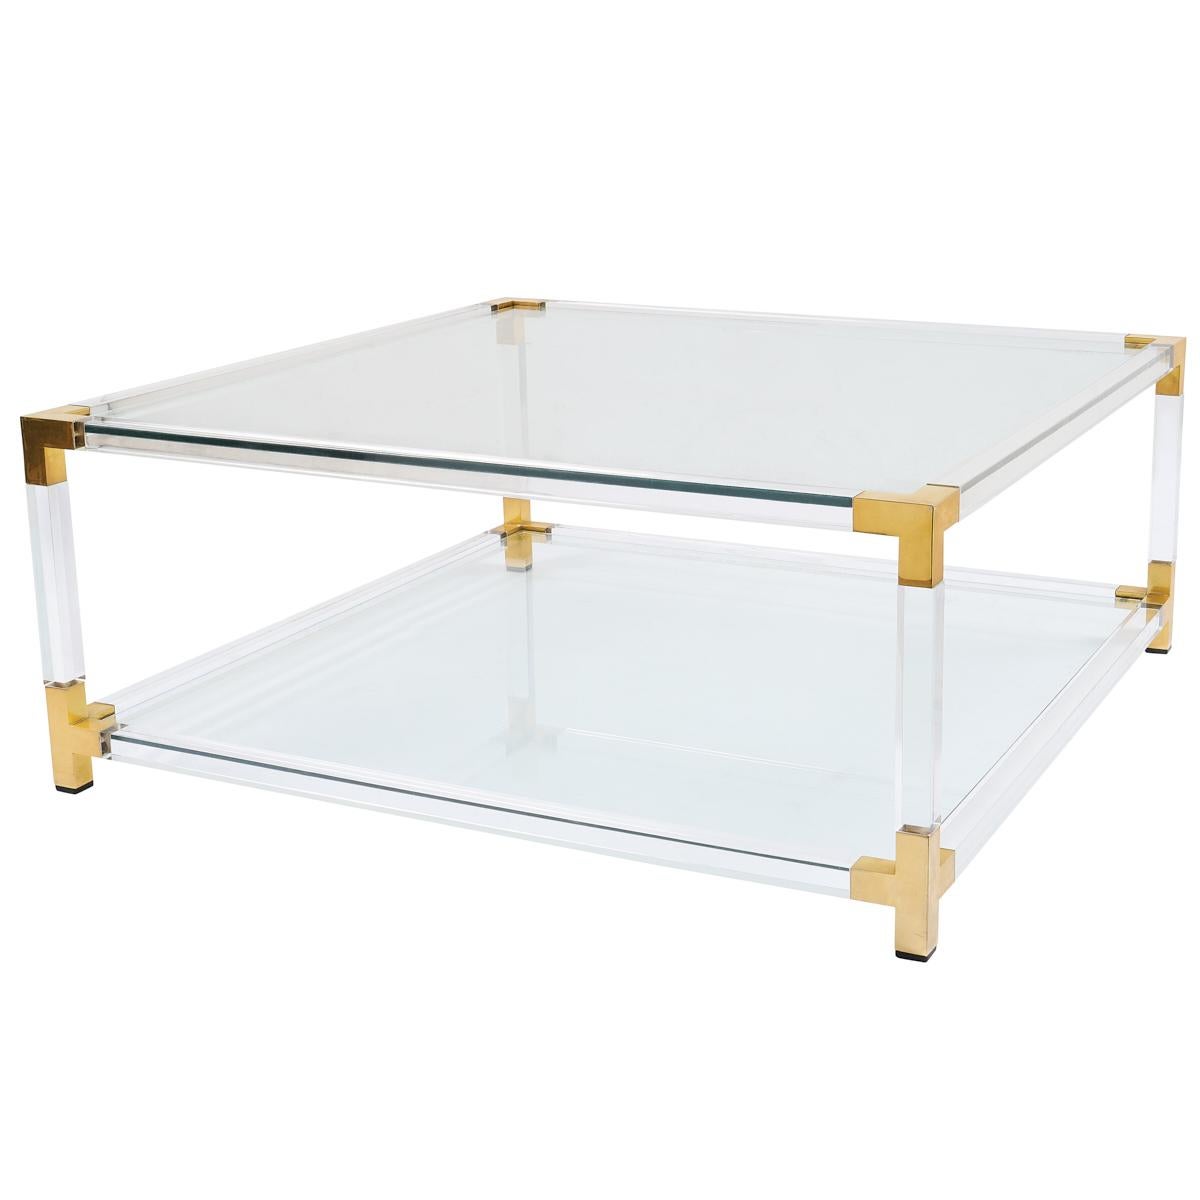 We spotted this stylish midcentury coffee table in Belgium. Made of plexiglass and brass, this versatile piece is barely there, but adds an unexpected element of glamor, especially in a traditional interior.